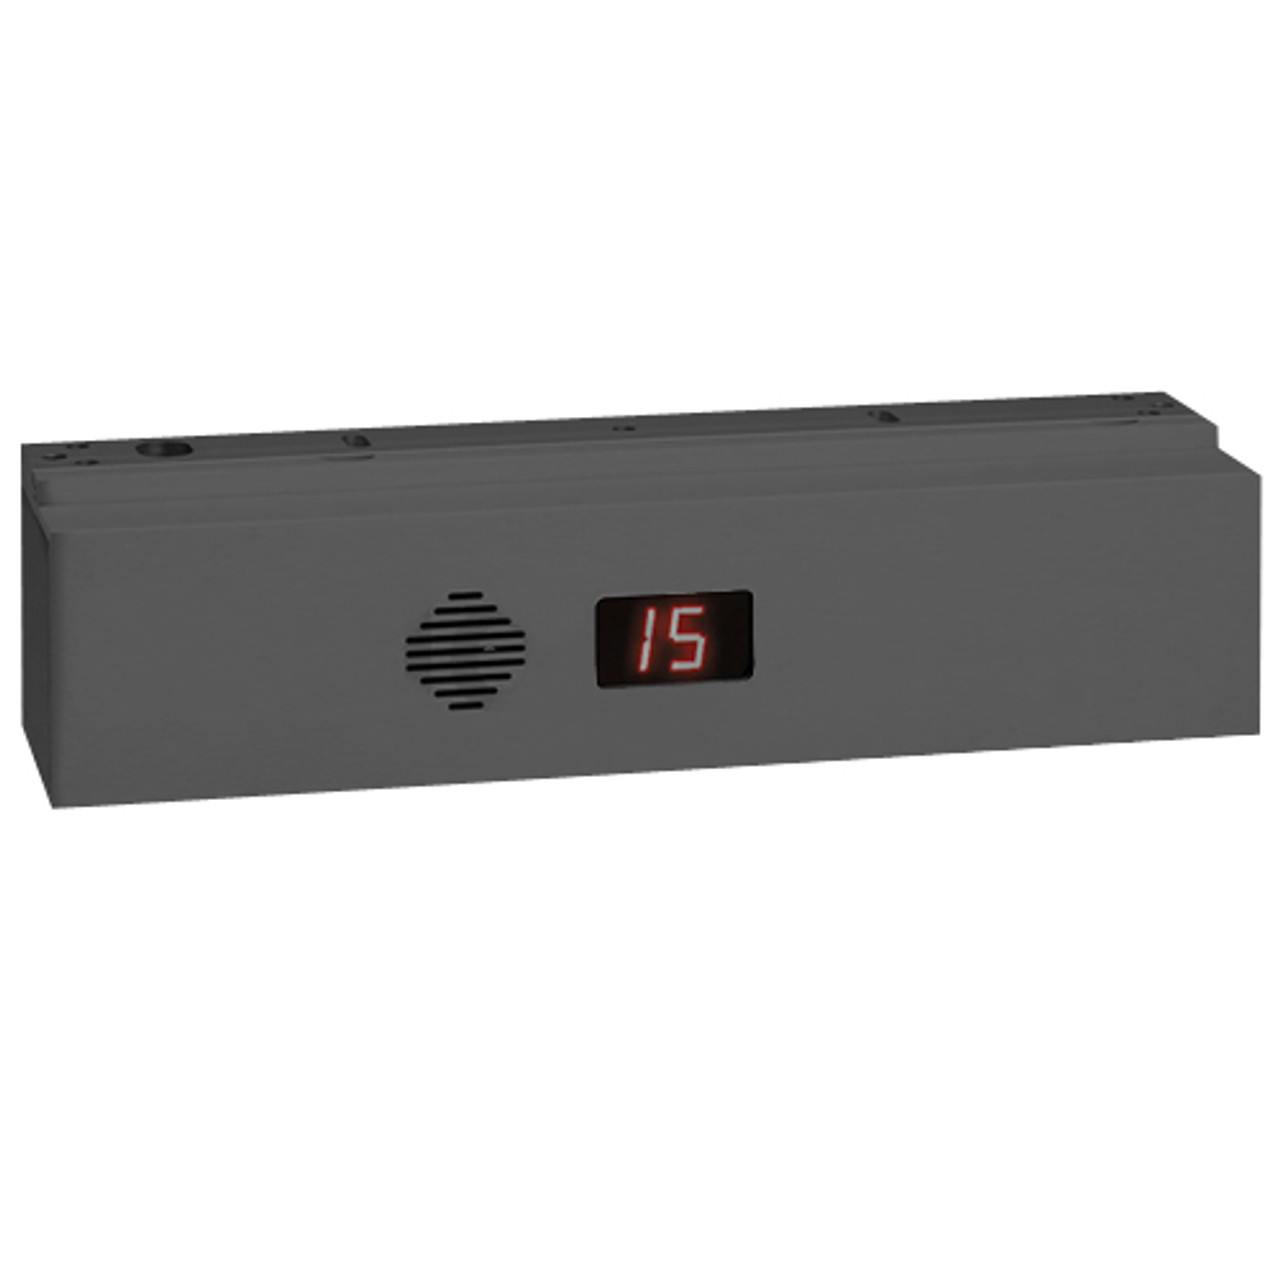 1511S-BD-L-Y-DB SDC 1511S Series Single Integrated Delayed Egress Locks with Door Position Status and Magnetic Bond Sensor in Black Anodized